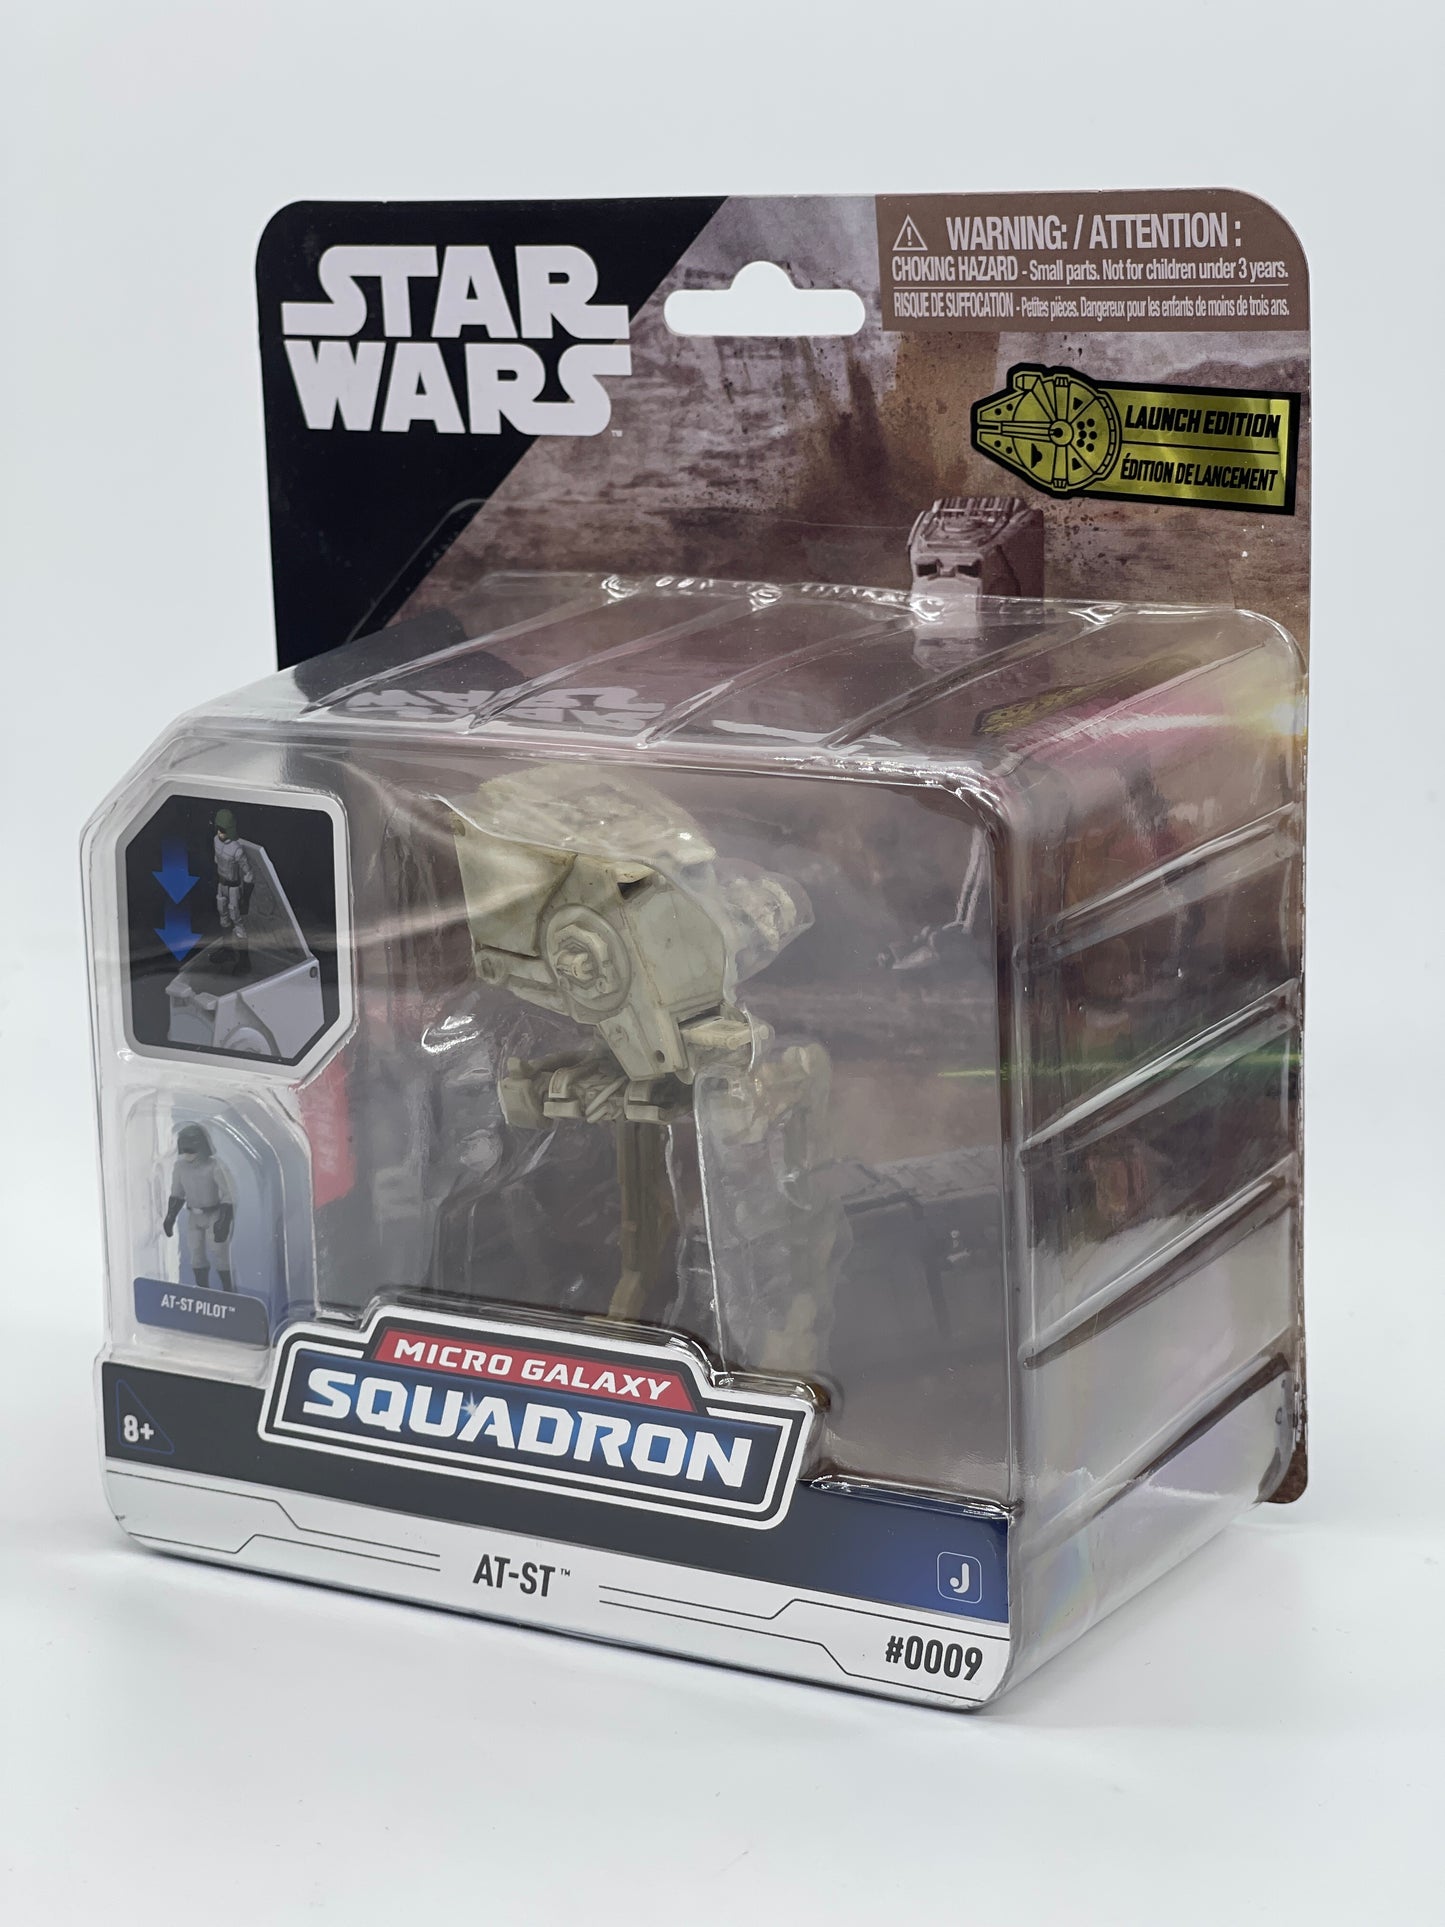 Star Wars Micro Galaxy Squadron "AT-ST" Launch Edition Serie #1 #0009